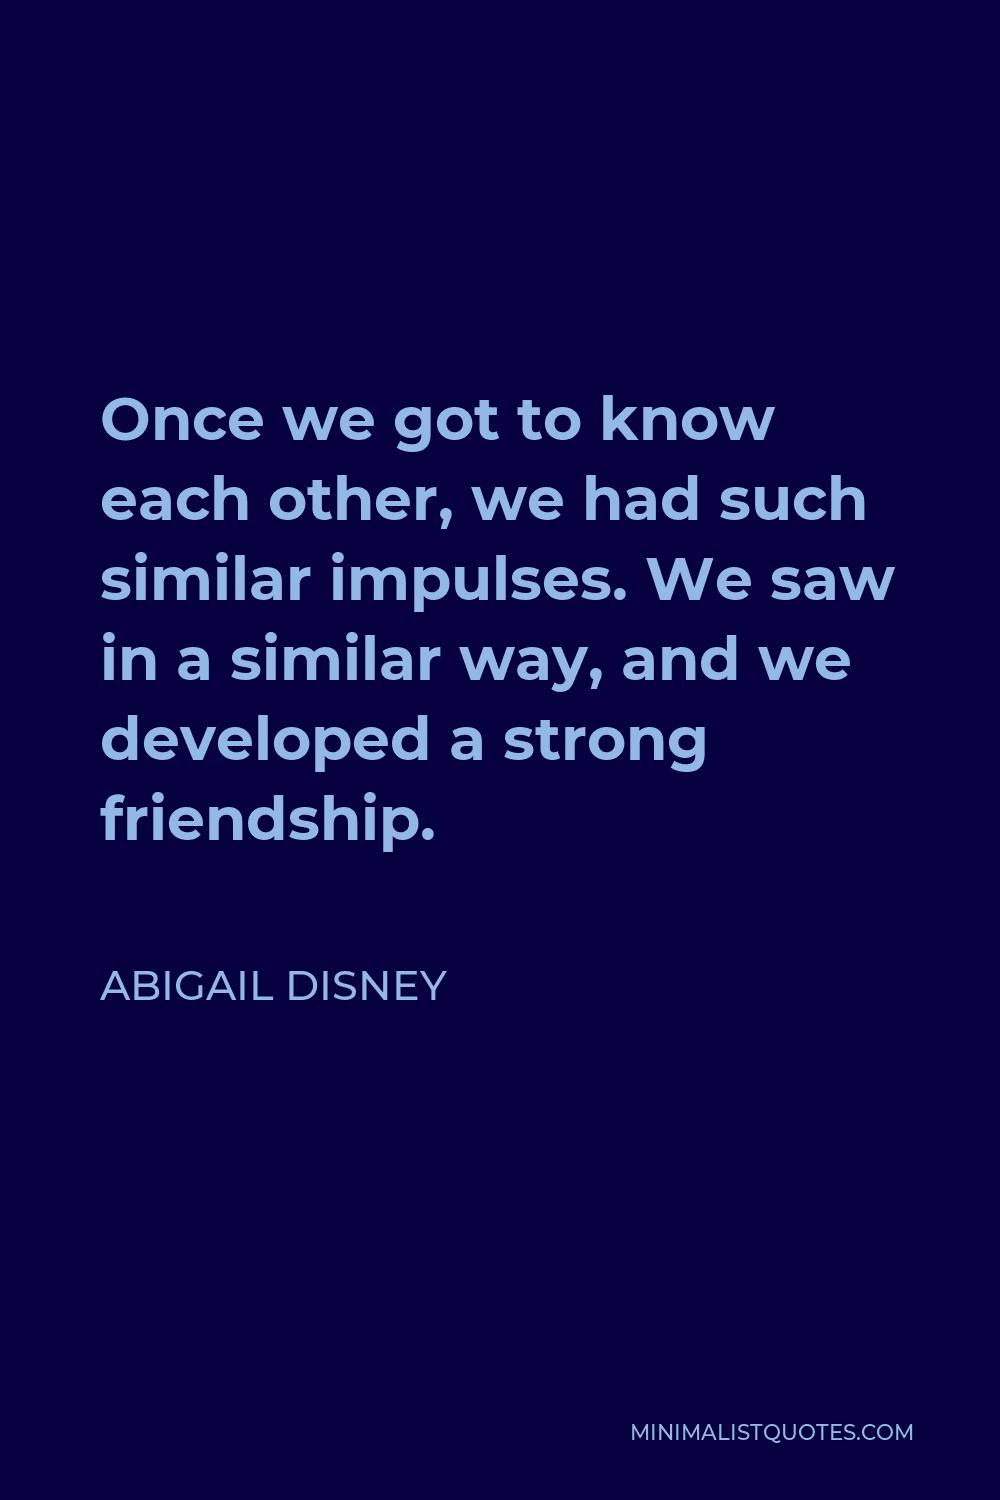 Abigail Disney Quote - Once we got to know each other, we had such similar impulses. We saw in a similar way, and we developed a strong friendship.